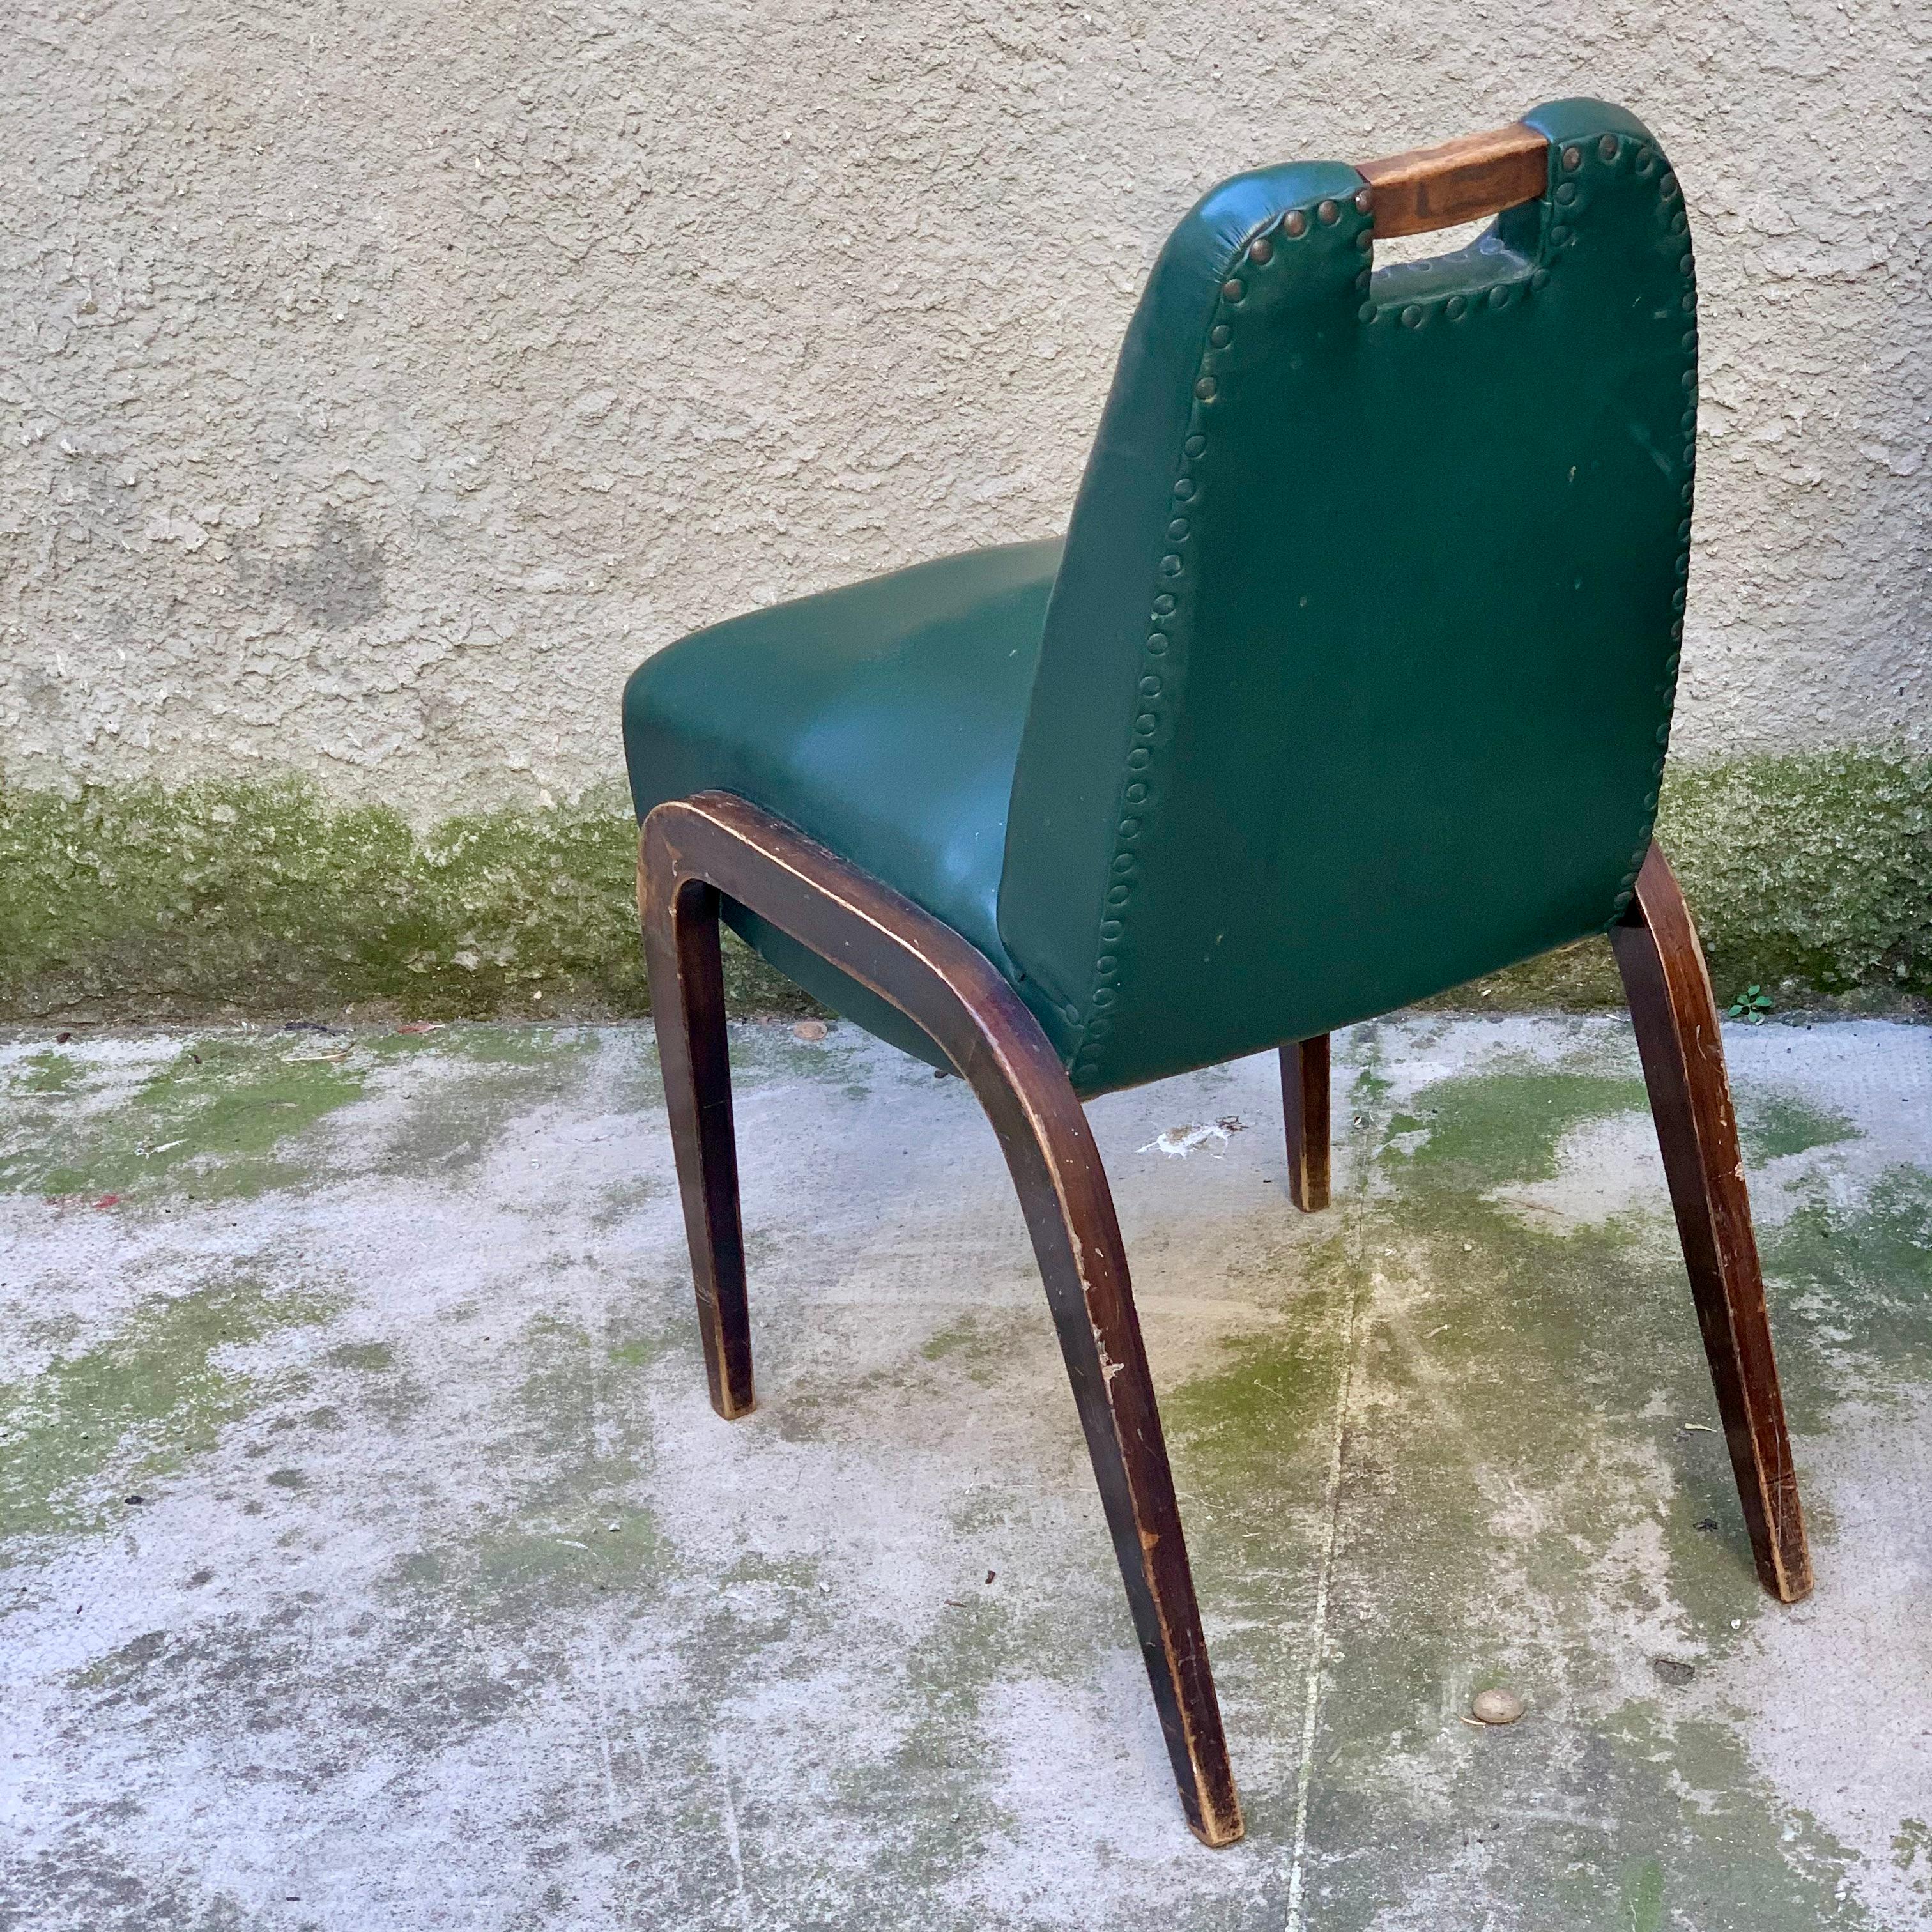 Faux Leather Set of 4 Wood and Leatherette Chairs - Italy - 1930s For Sale